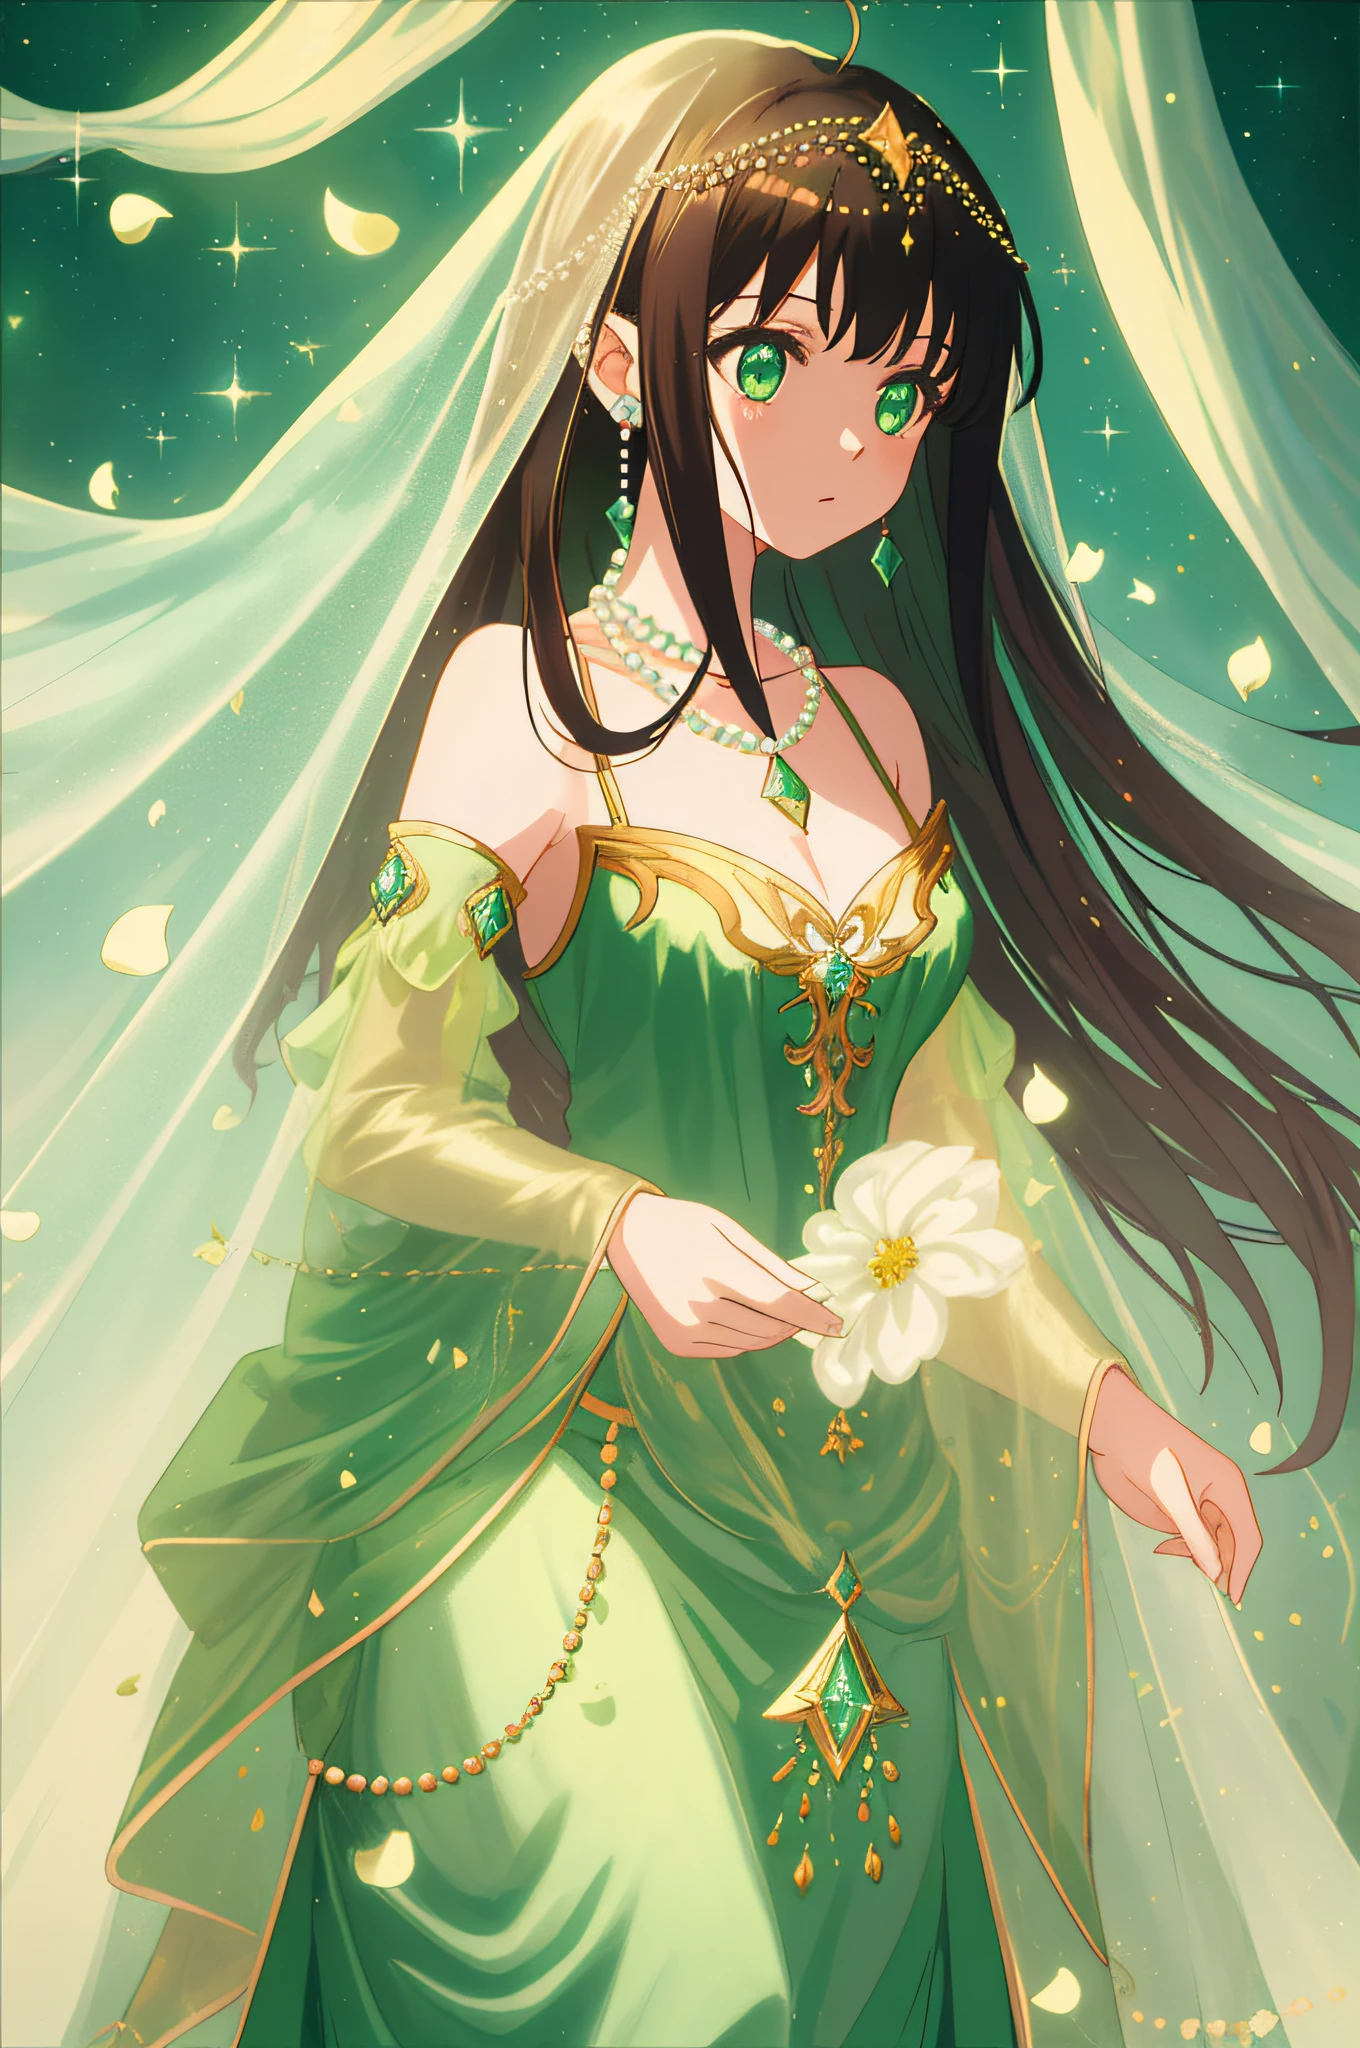 8K，best qualtiy，tmasterpiece，anime big breast，1girll，brunette color hair，The princess cuts the bangs，Coiled hairstyle，Gorgeous hair accessories，Floating yarn，Veil，a beauty girl，Slender figure，flatchest，耳Nipple Ring，pearls necklace，Stand up，Golden Princess dress，Normal attire，Not exposed，Normal hands，Light green velvet curtain background，Embellished with fantastic gemstones，diamond，As estrelas，petals，pearls，Dreamy atmosphere，Look sideways at the camera